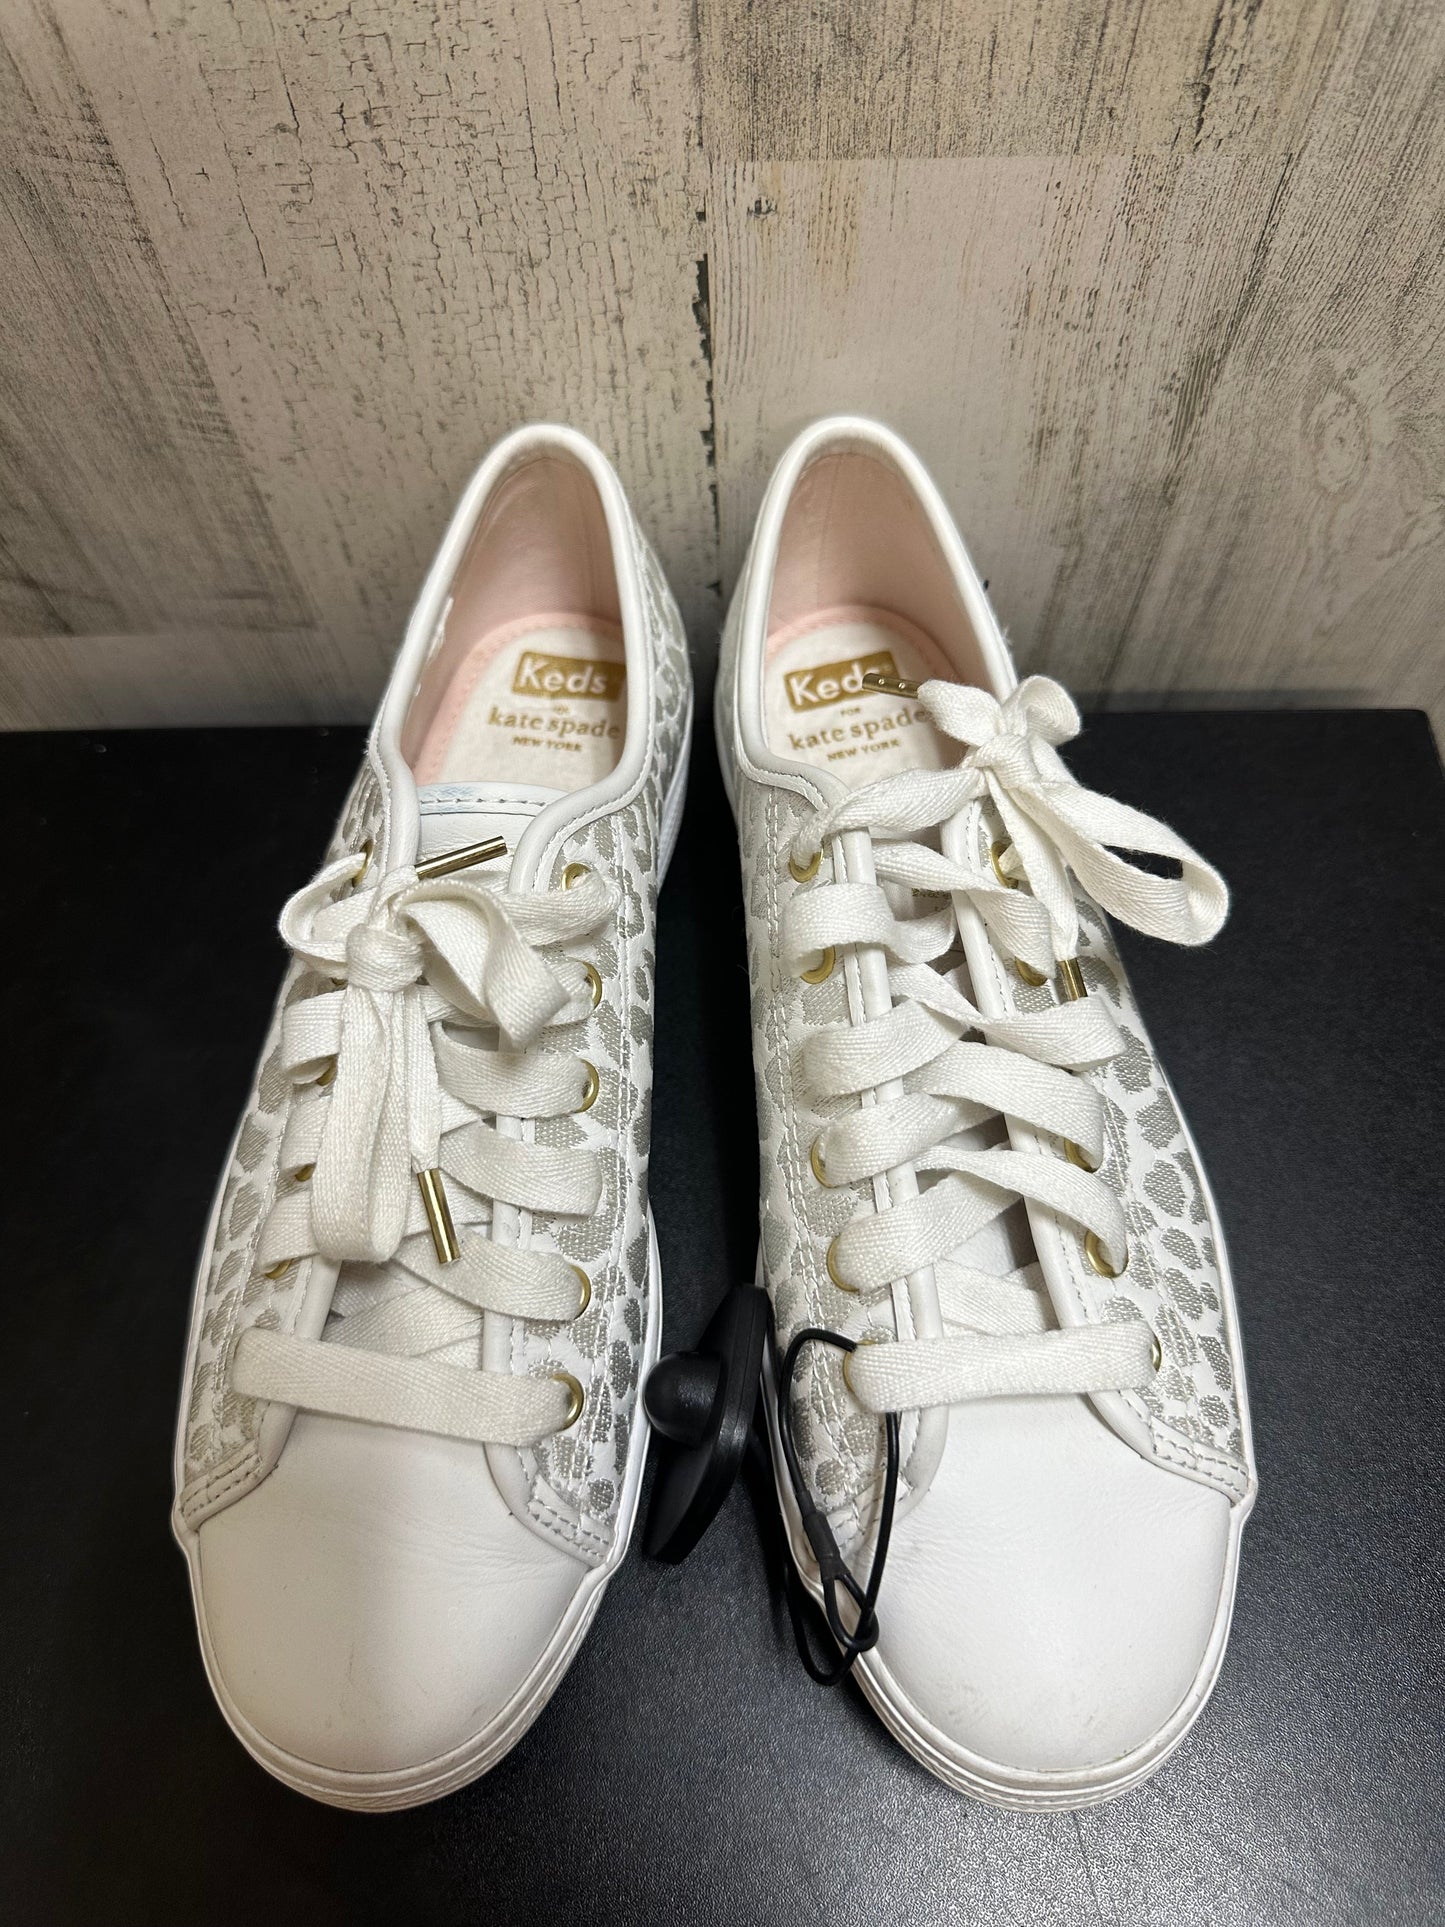 White Shoes Sneakers Keds, Size 7.5